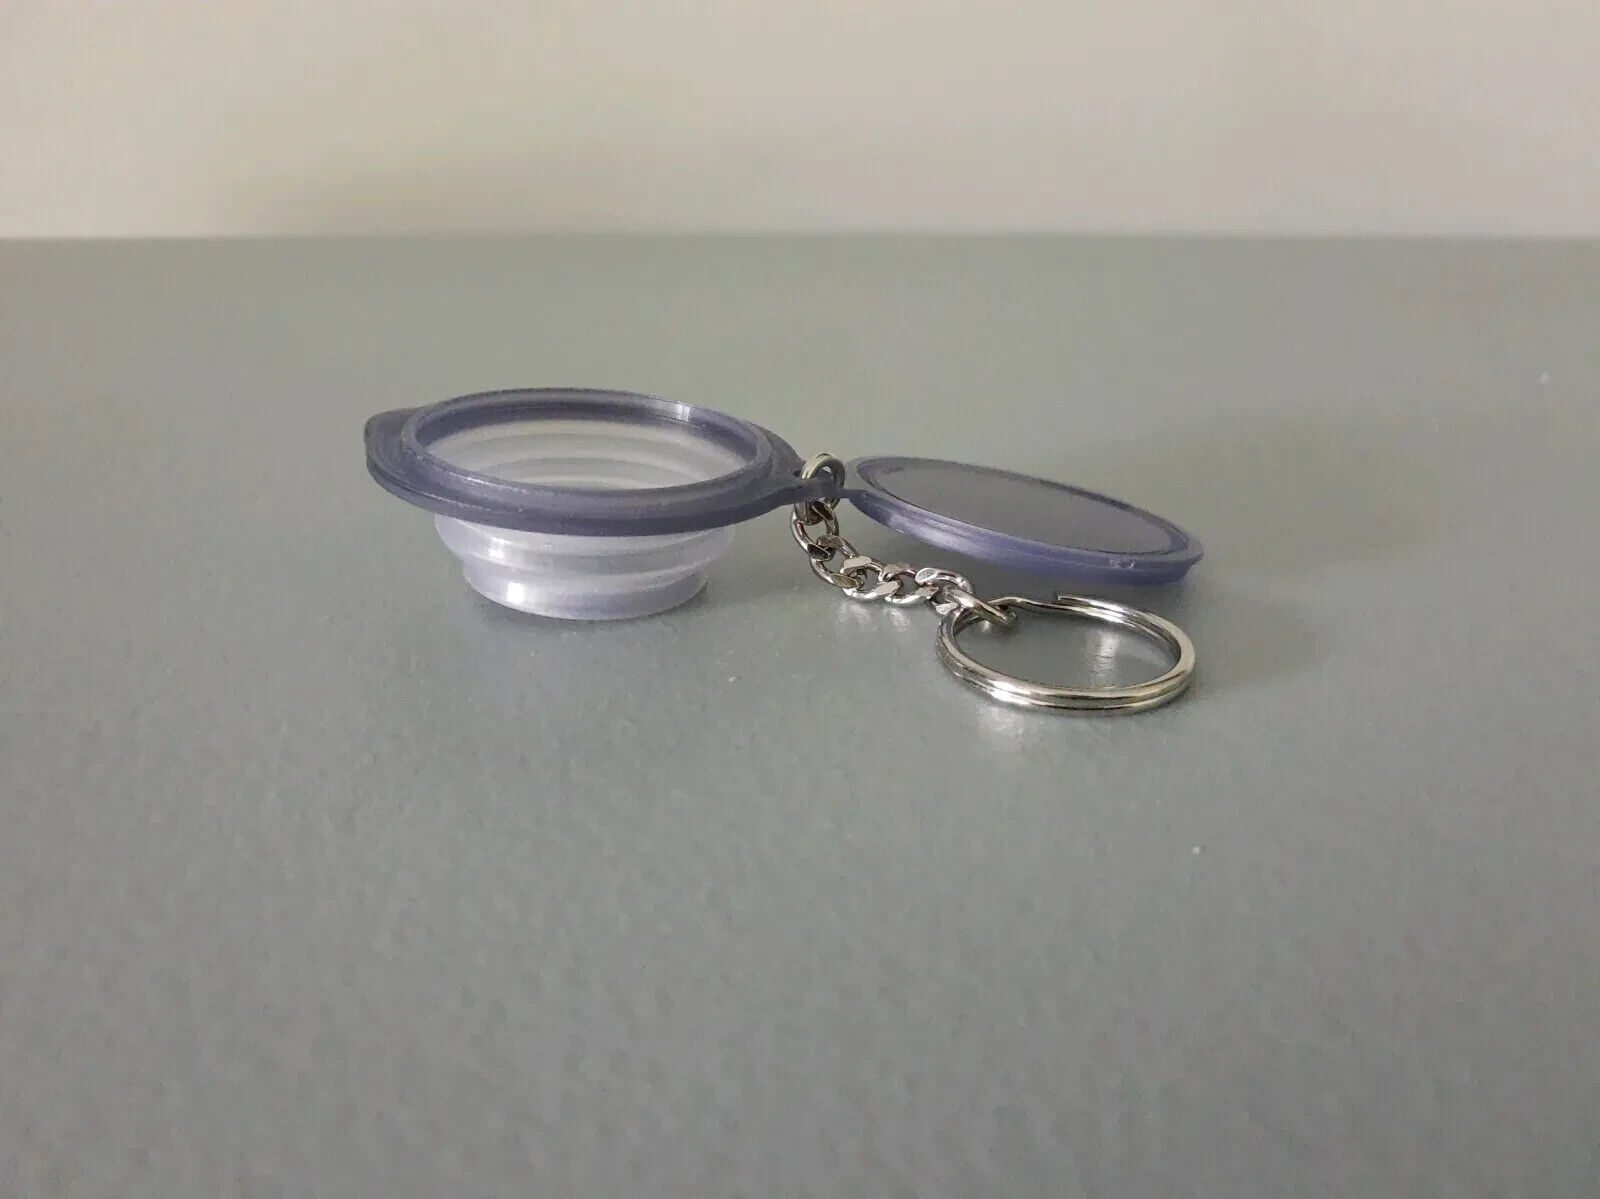 Tupperware Flat Out Bowl Keychain Tiny Treasures New and unwrapped - opens 